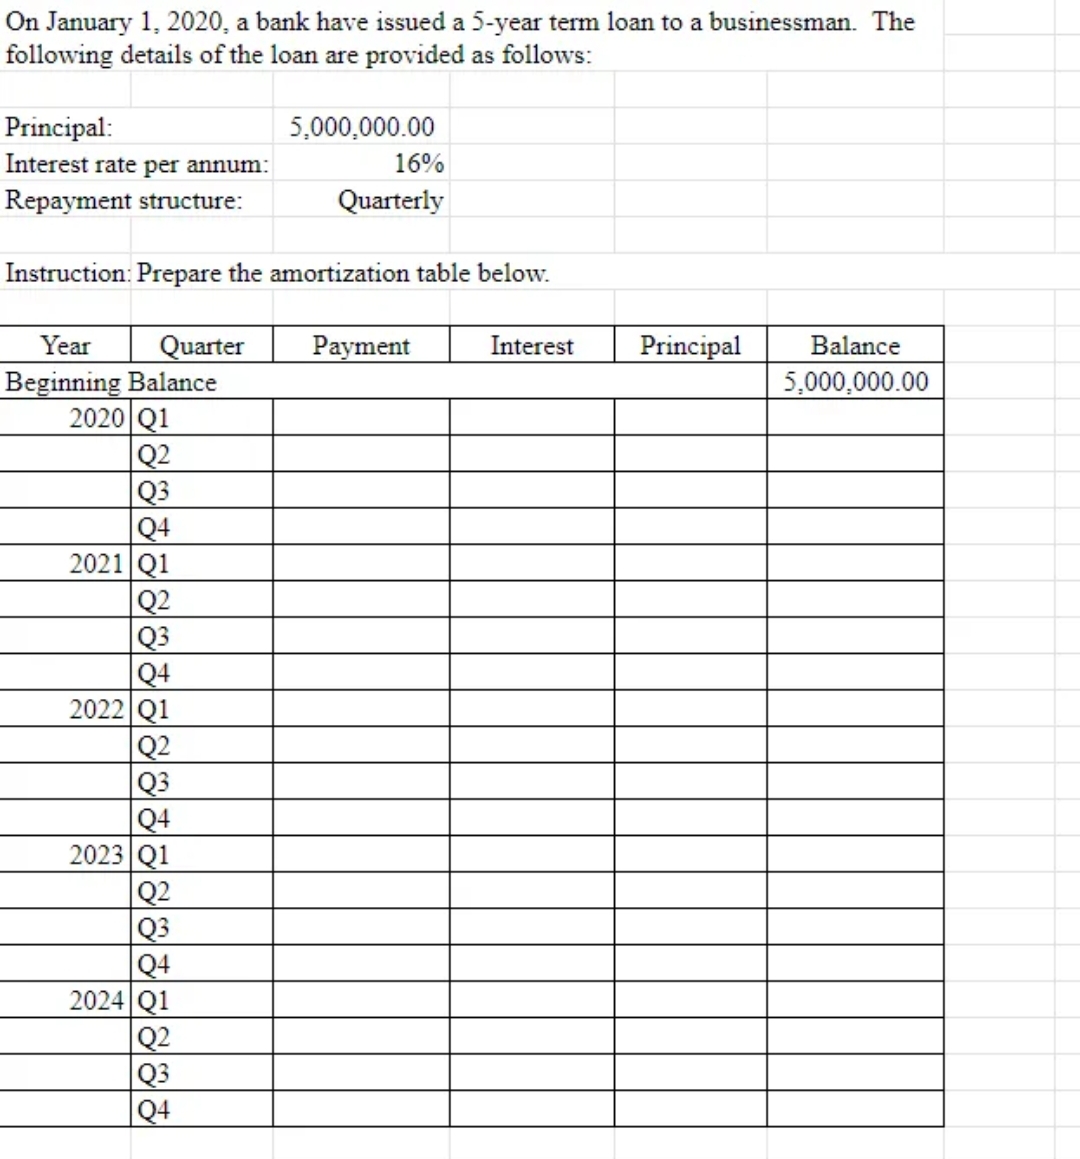 On January 1, 2020, a bank have issued a 5-year term loan to a businessman. The
following details of the loan are provided as follows:
Principal:
Interest rate per annum:
Repayment structure:
5,000,000.00
Instruction: Prepare the amortization table below.
2020 Q1
Q2
Q3
Q4
2021 Q1
Q2
Q3
Q4
2022 Q1
16%
Quarterly
Year Quarter Payment
Beginning Balance
Q2
Q3
Q4
2023 Q1
Q2
Q3
Q4
2024 Q1
Q2
Q3
Q4
Interest
Principal Balance
5,000,000.00